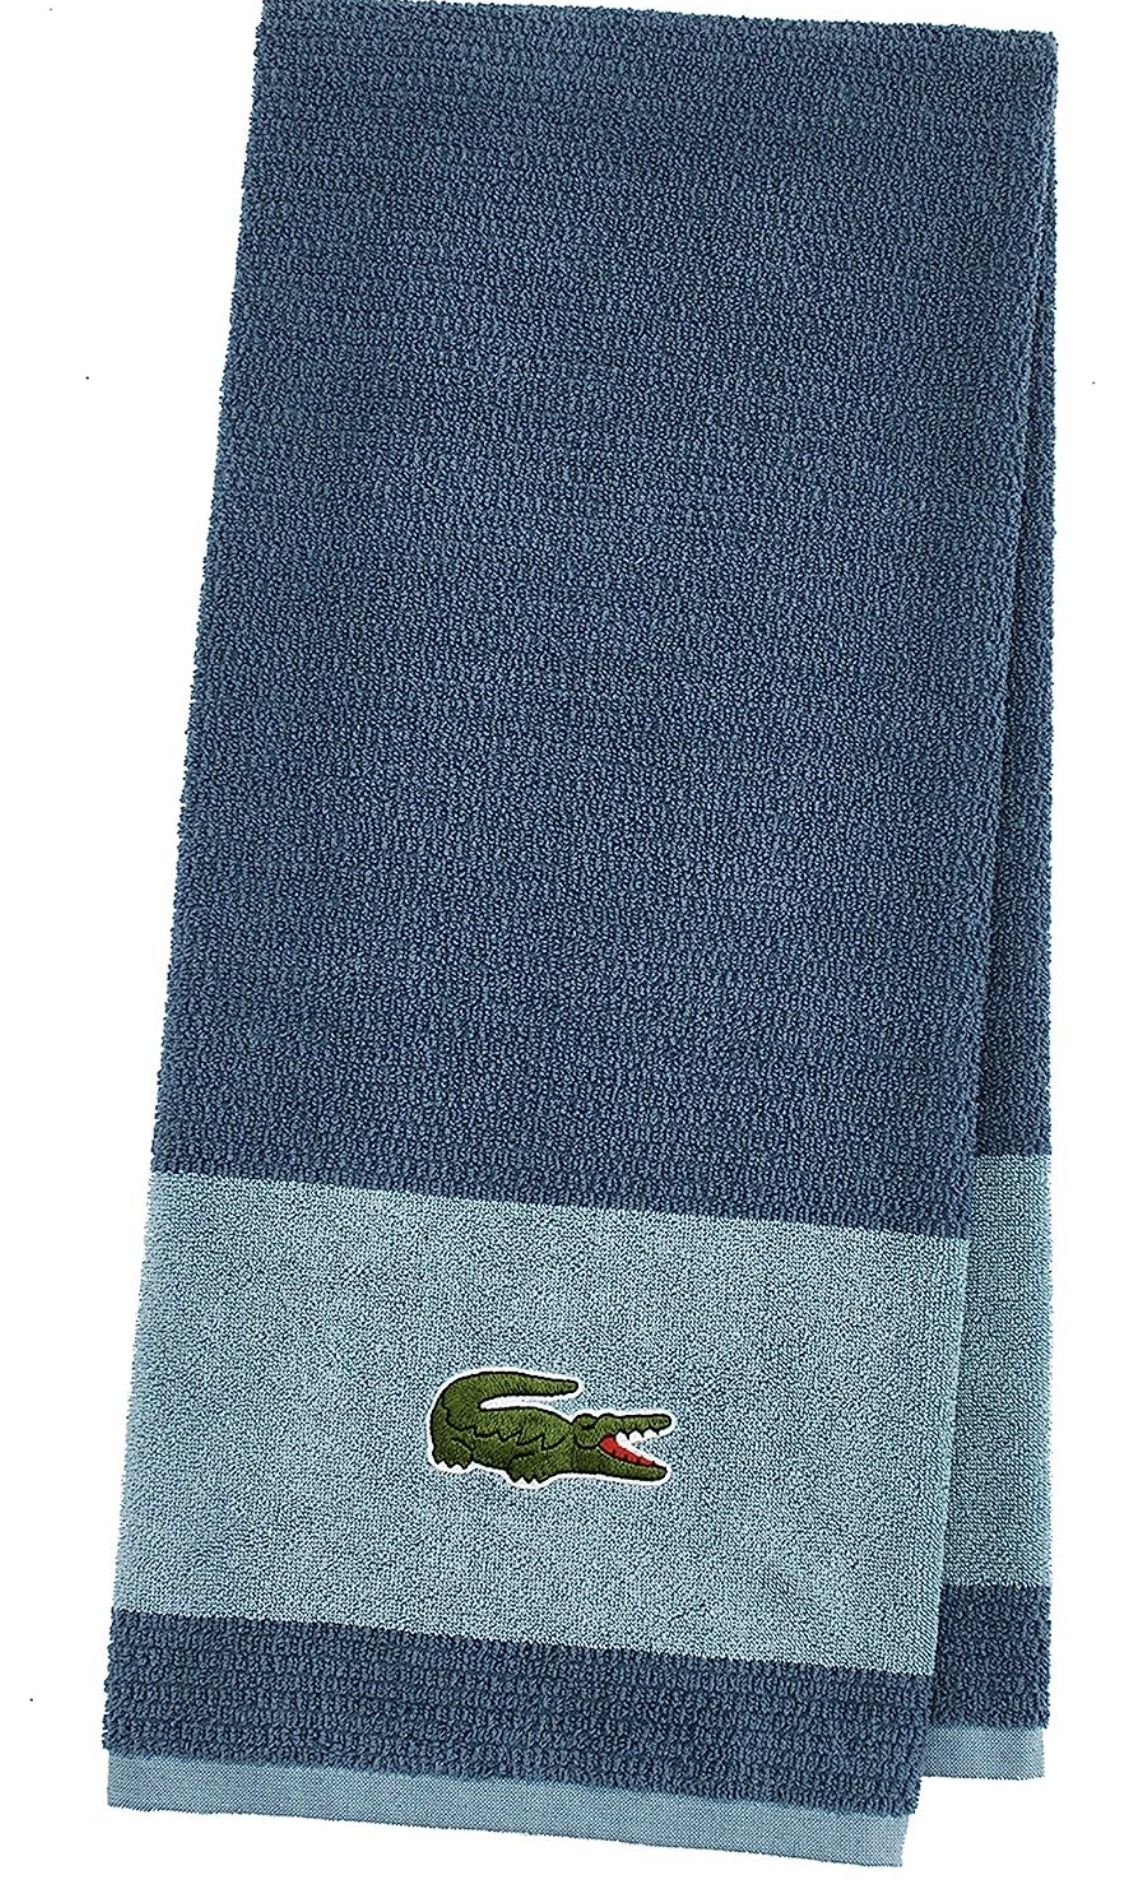 Lacoste Bath Towel 100% Cotton 30x 52 Embroidered Logo for Sale in  Glendora, CA - OfferUp